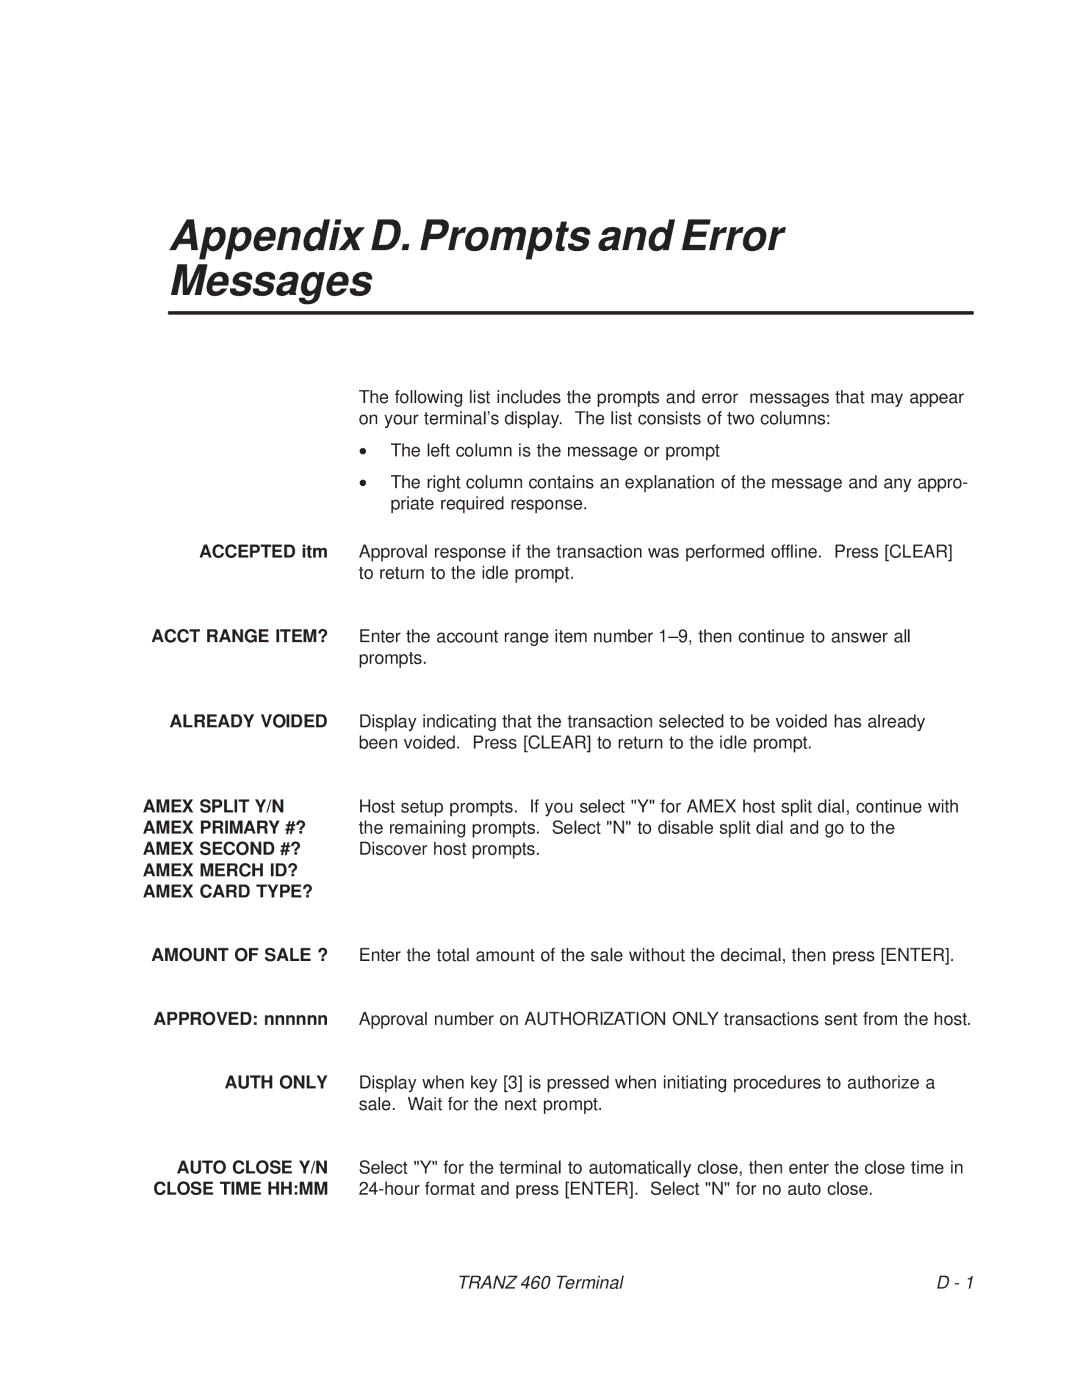 VeriFone TRANZ 460 manual Appendix D. Prompts and Error Messages, Approved nnnnnn 